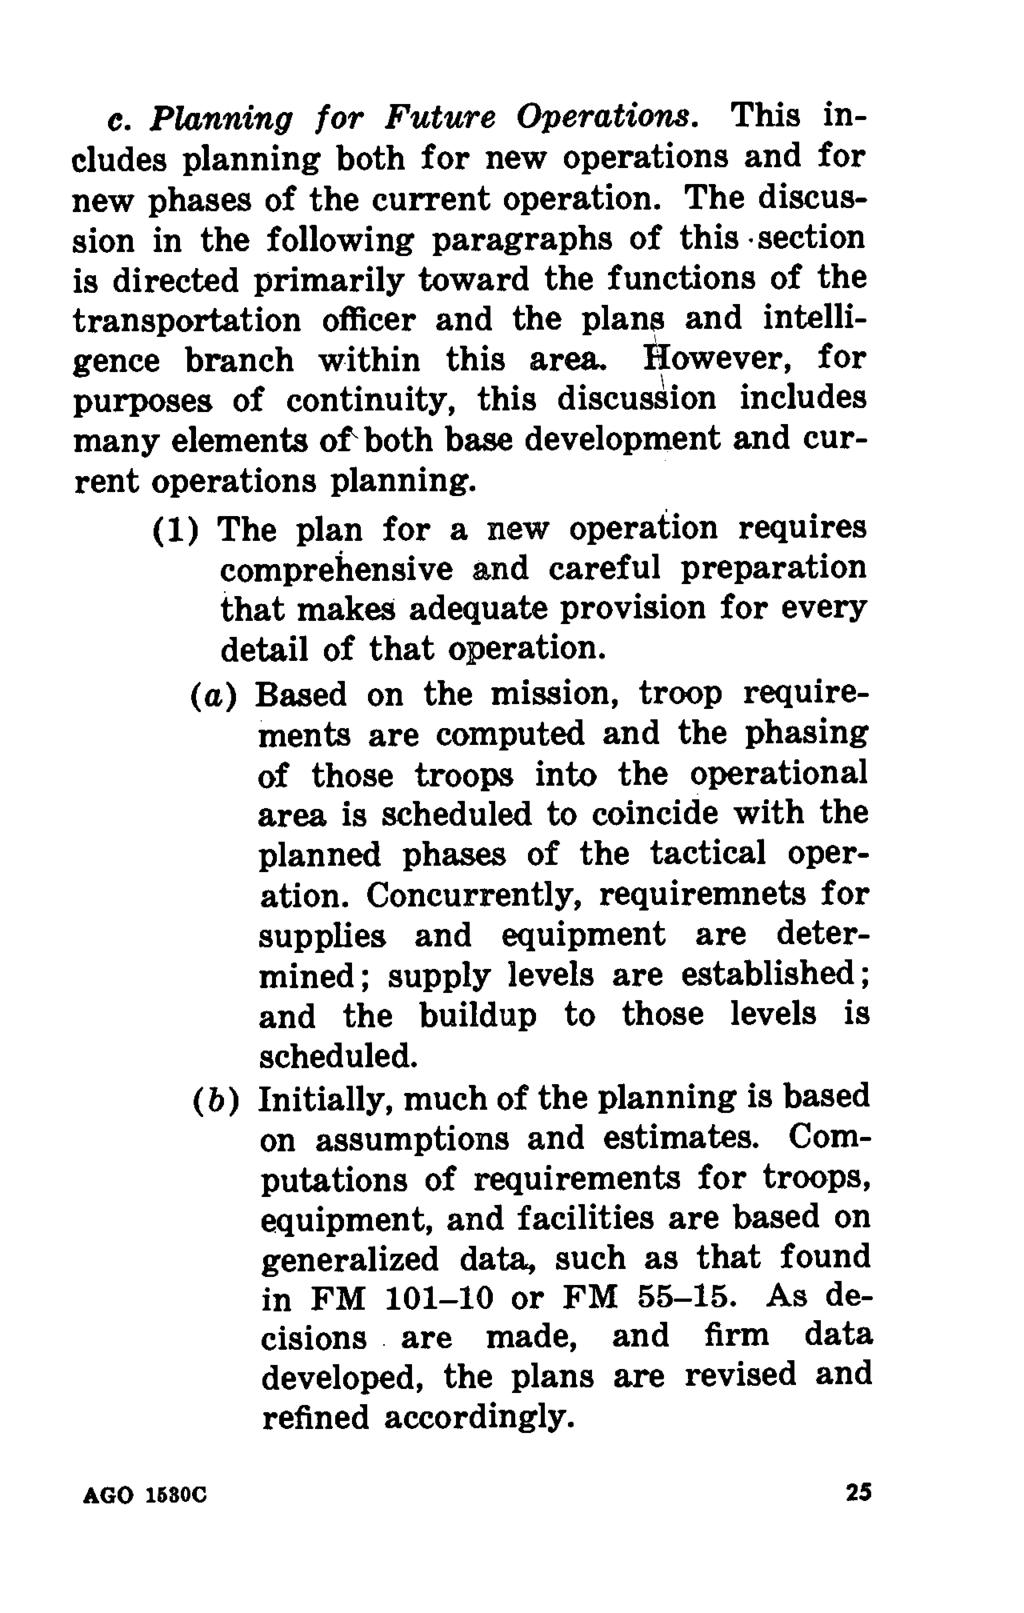 c. Planning for Future Operations. This includes planning both for new operations and for new phases of the current operation.